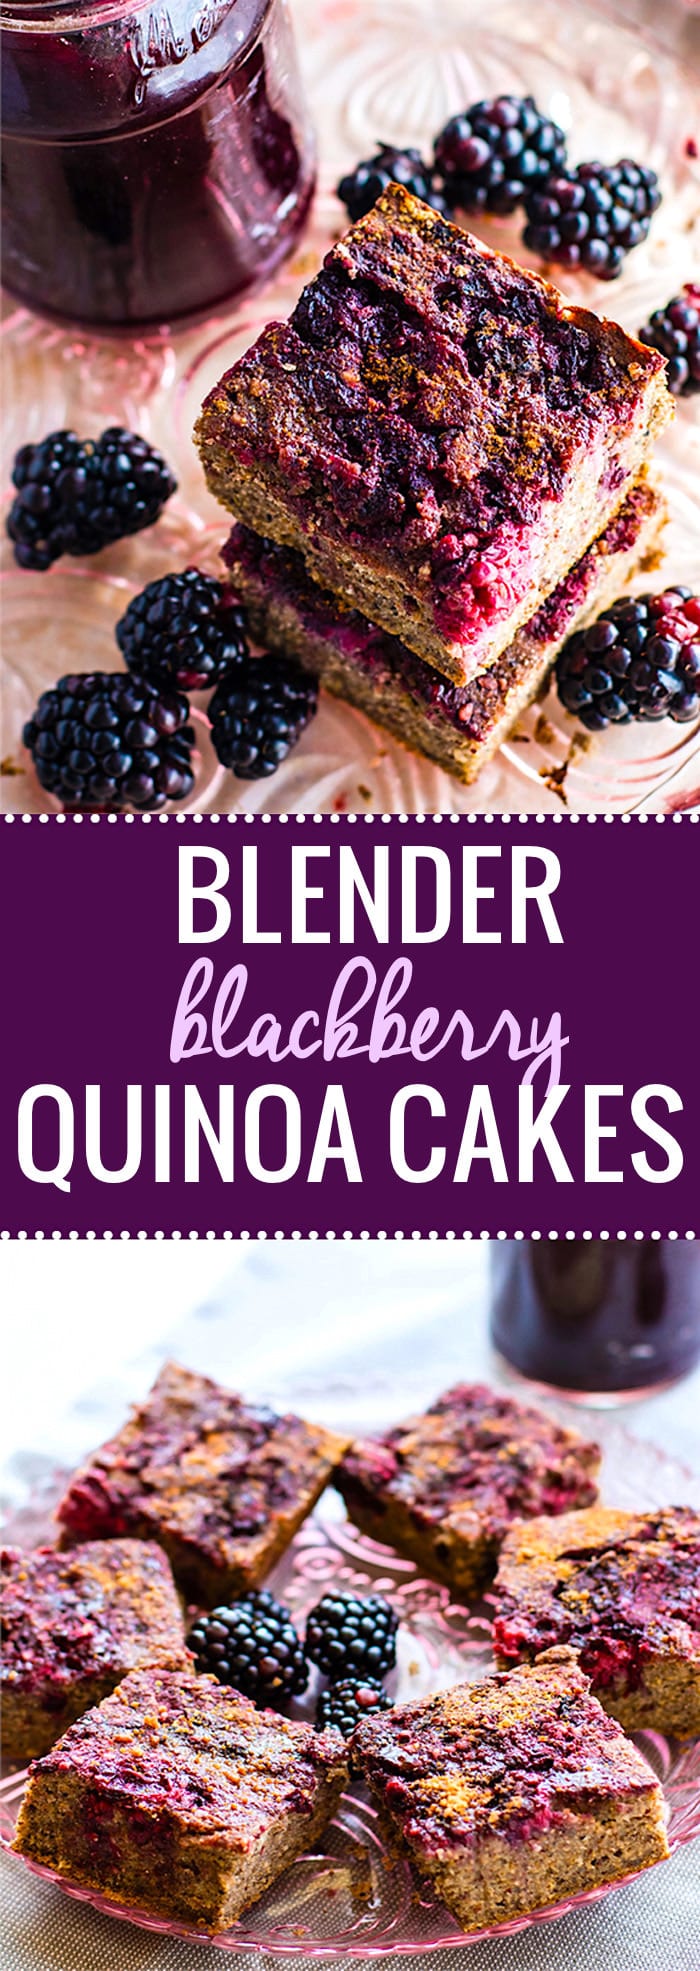 Healthy blender blackberry quinoa cakes recipe! These gluten free quinoa cakes are made with simple fresh ingredients. Dairy free, no refined sugar, and delicious! No oil or butter needed. Just blend and bake! They are packed full of fiber, protein, and great for breakfast, snacks, or desserts. www.cottercrunch.com